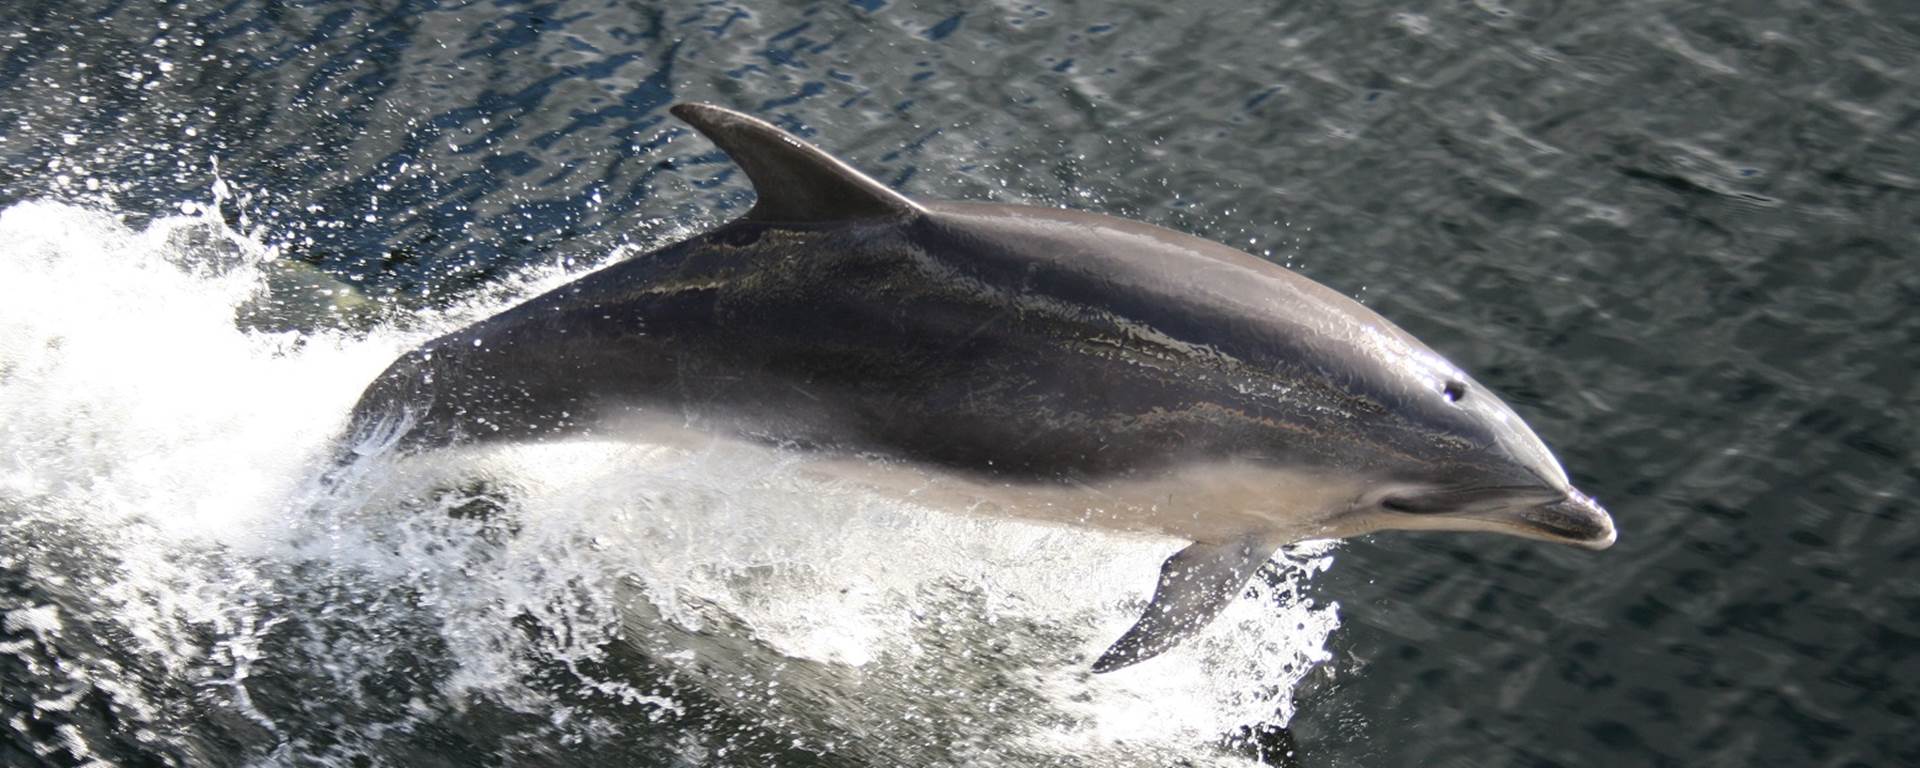 Dolphin jumping from the water in Doubtful Sound